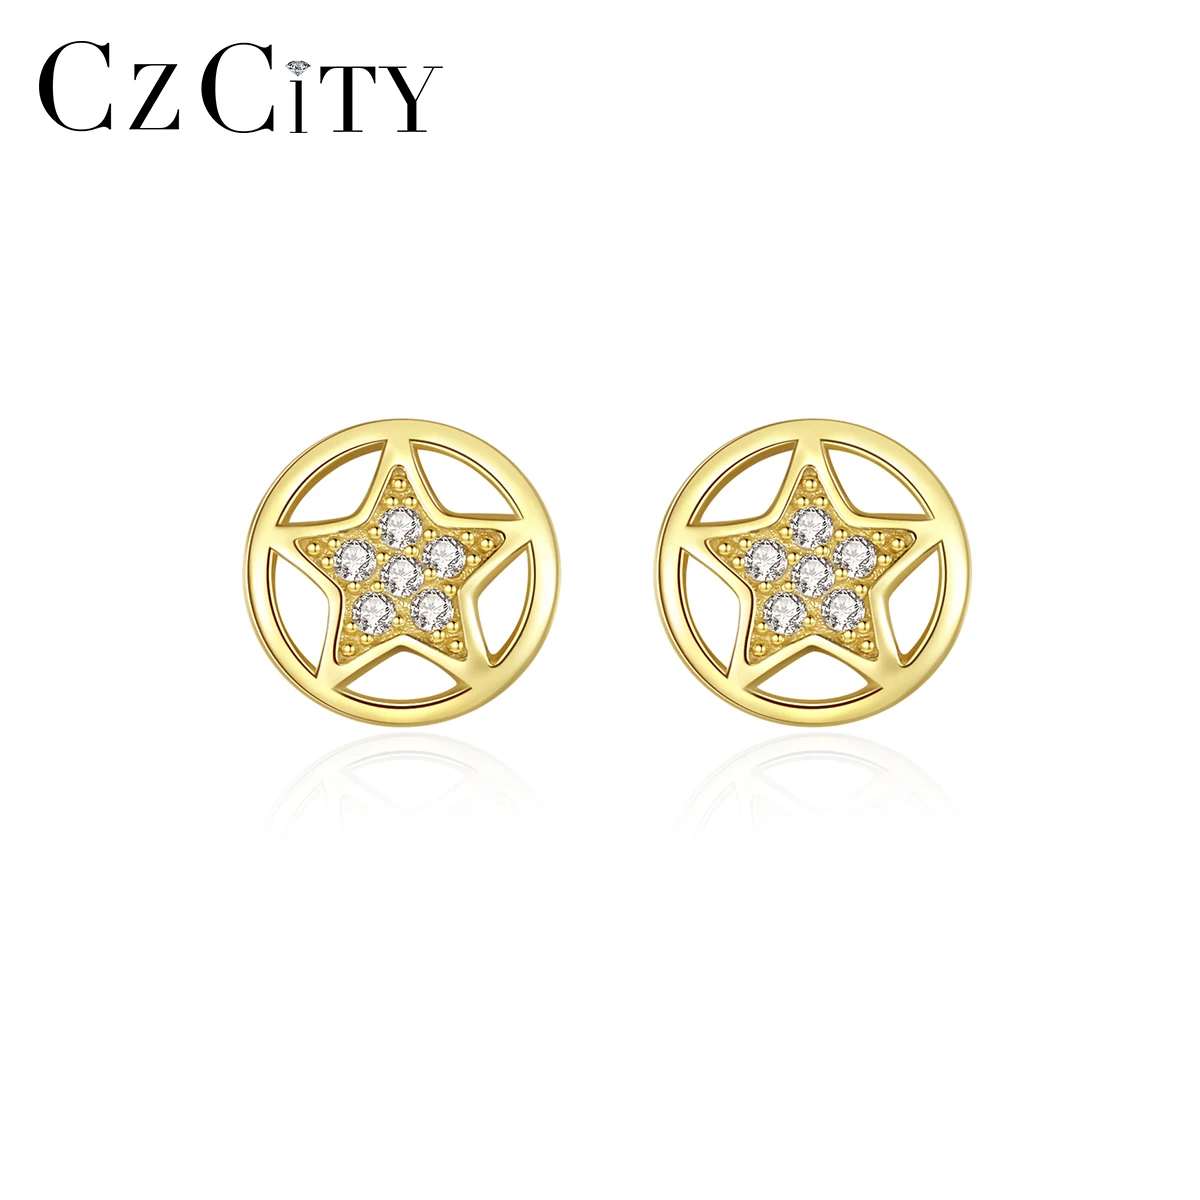 

CZCITY Fashion 925 Sterling Silver Star Stud Earrings for Women Fine Jewelry Round CZ Pendientes Bijoux Femme Anniversary Gifts